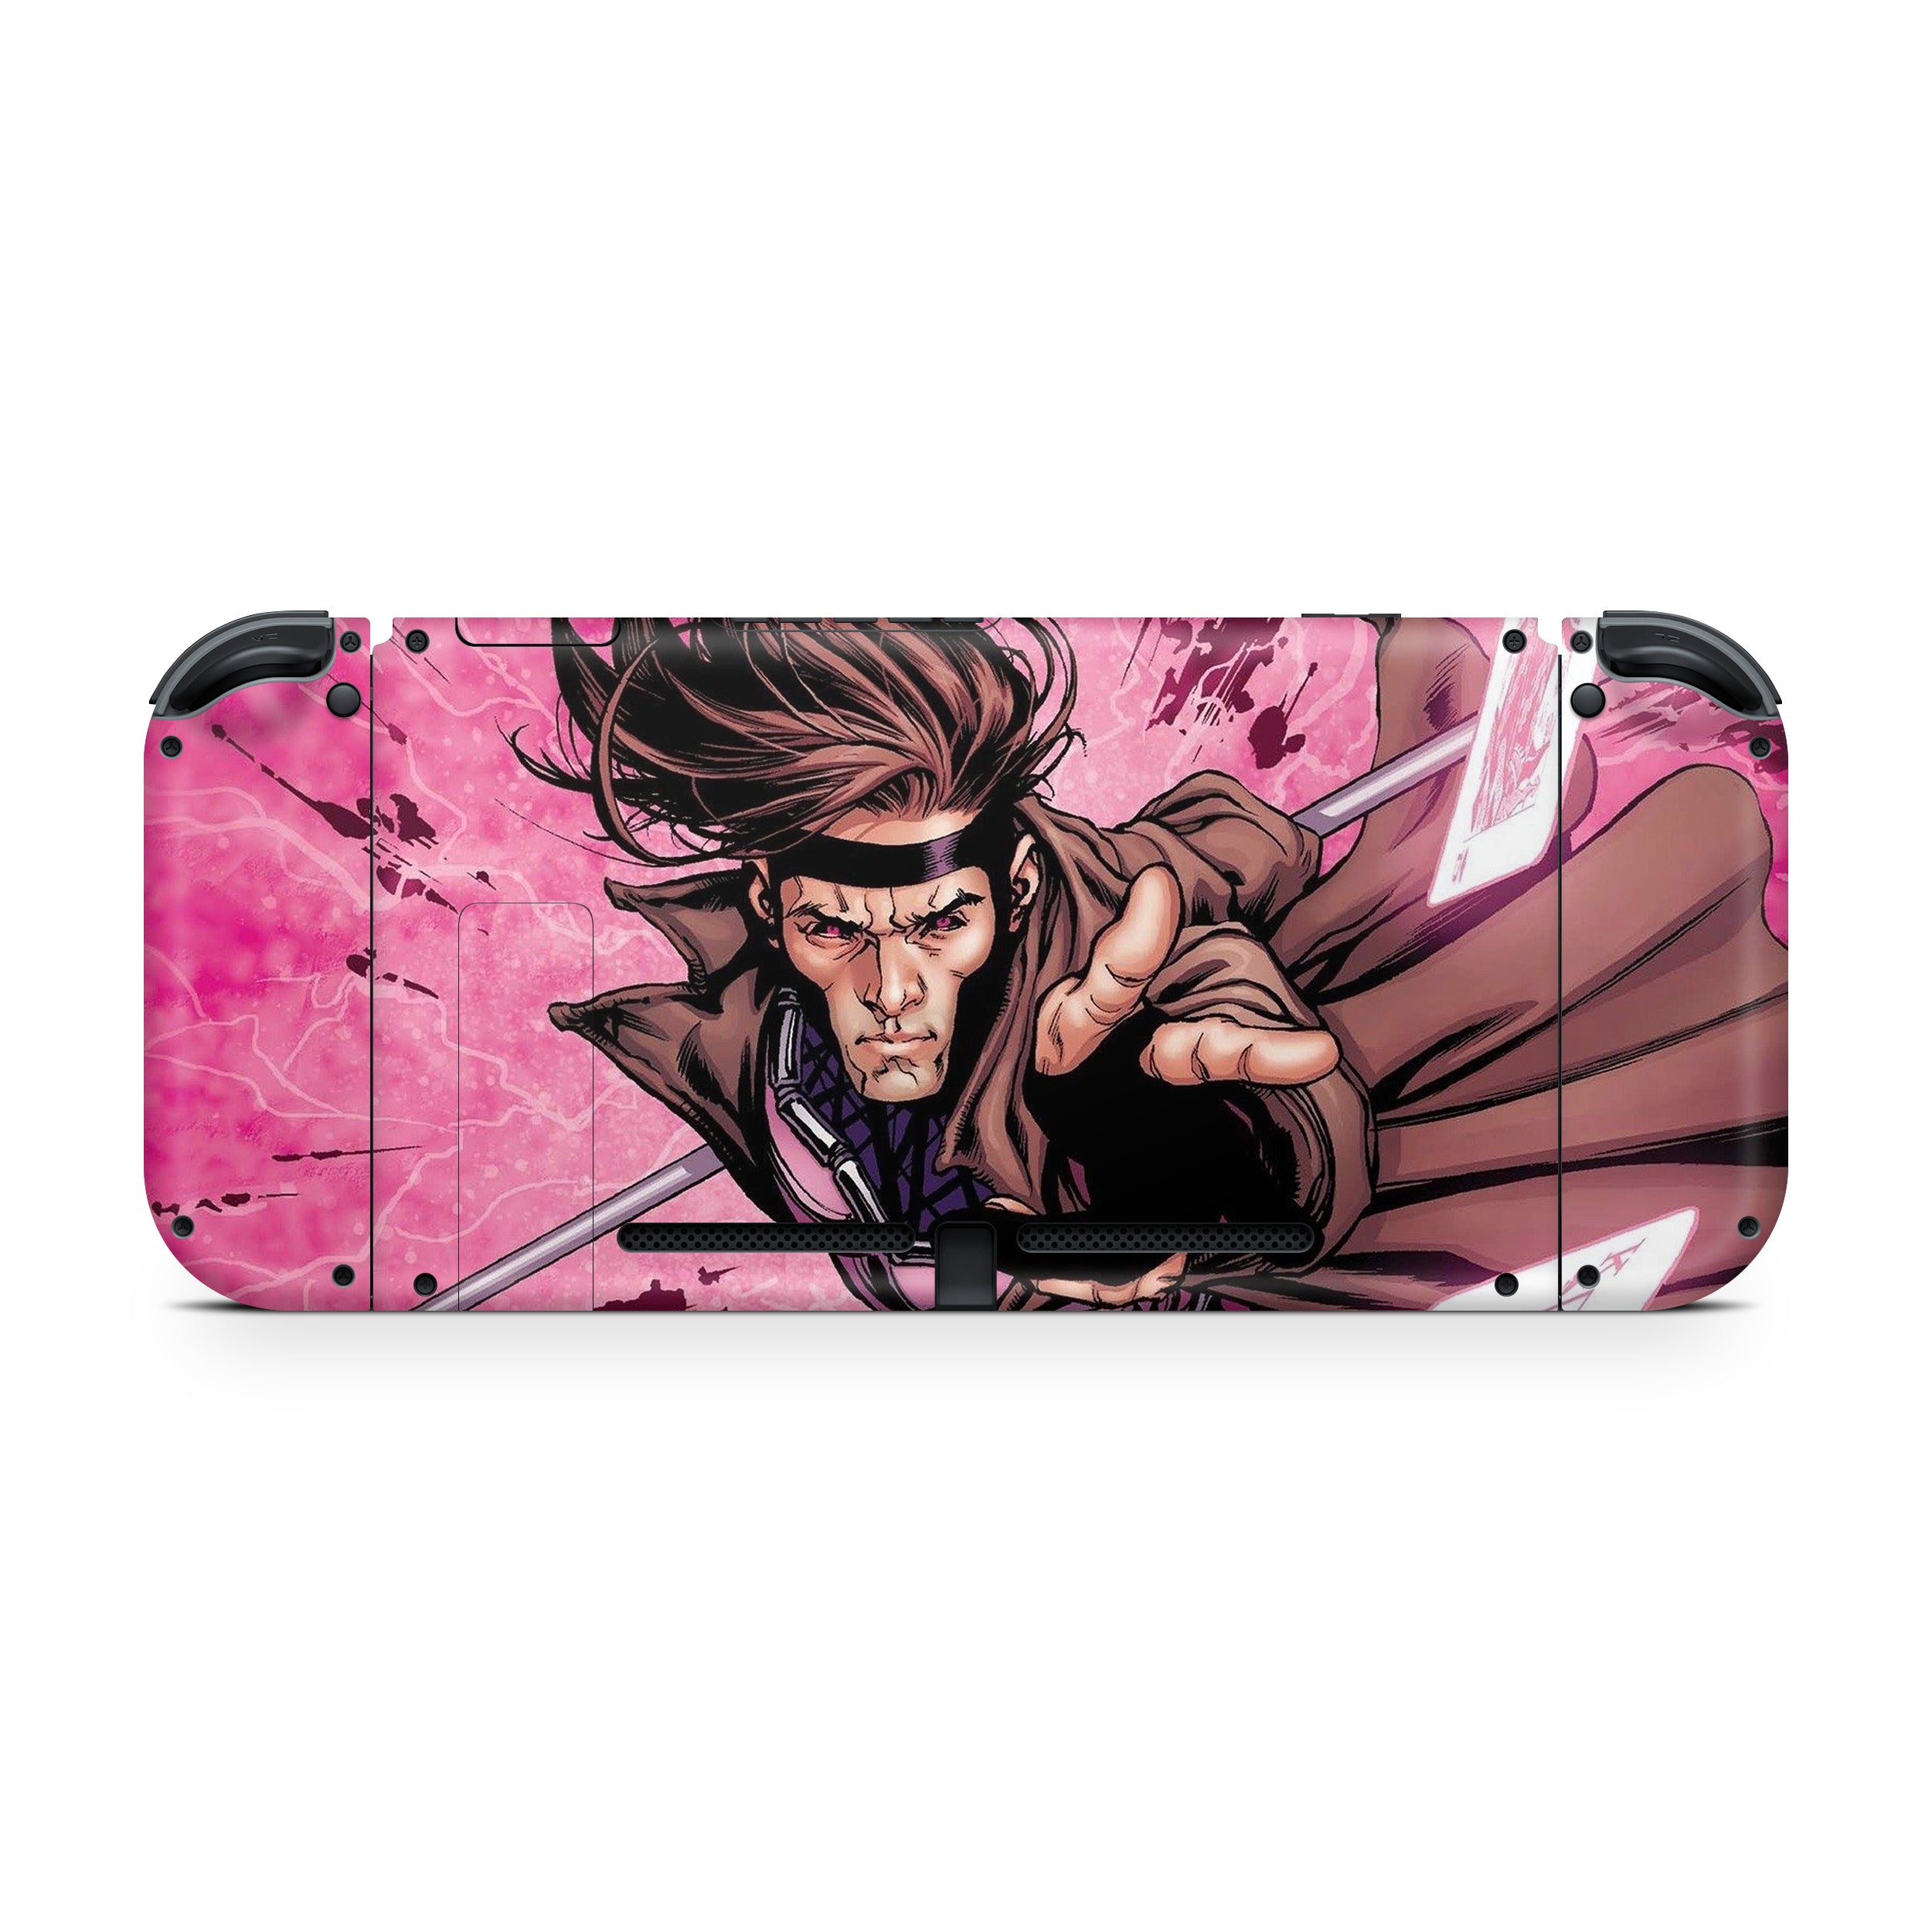 A video game skin featuring a Marvel Comics X Men Gambit design for the Nintendo Switch.